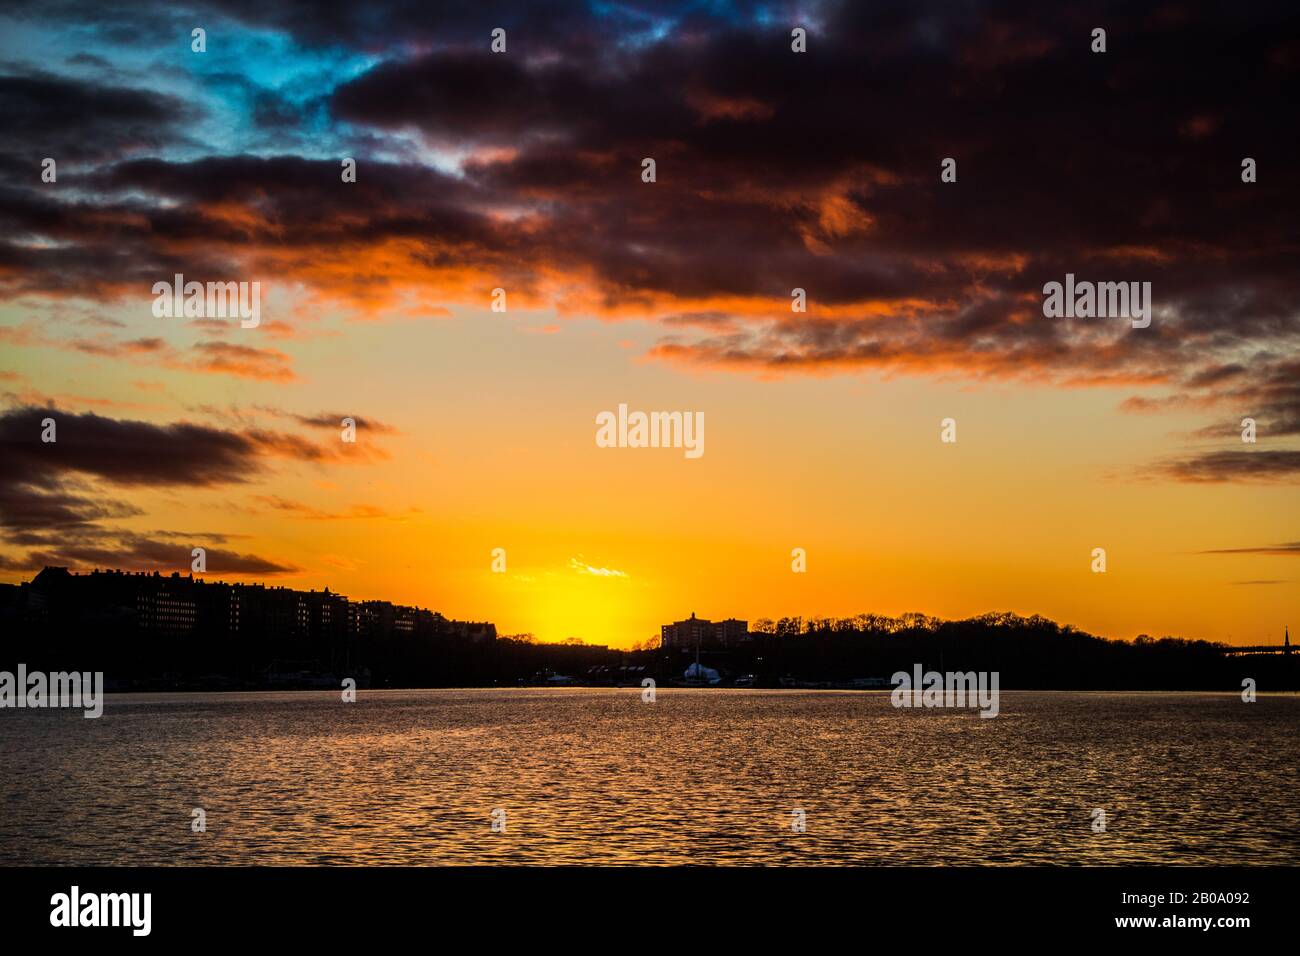 Sunset in Sweden Stock Photo